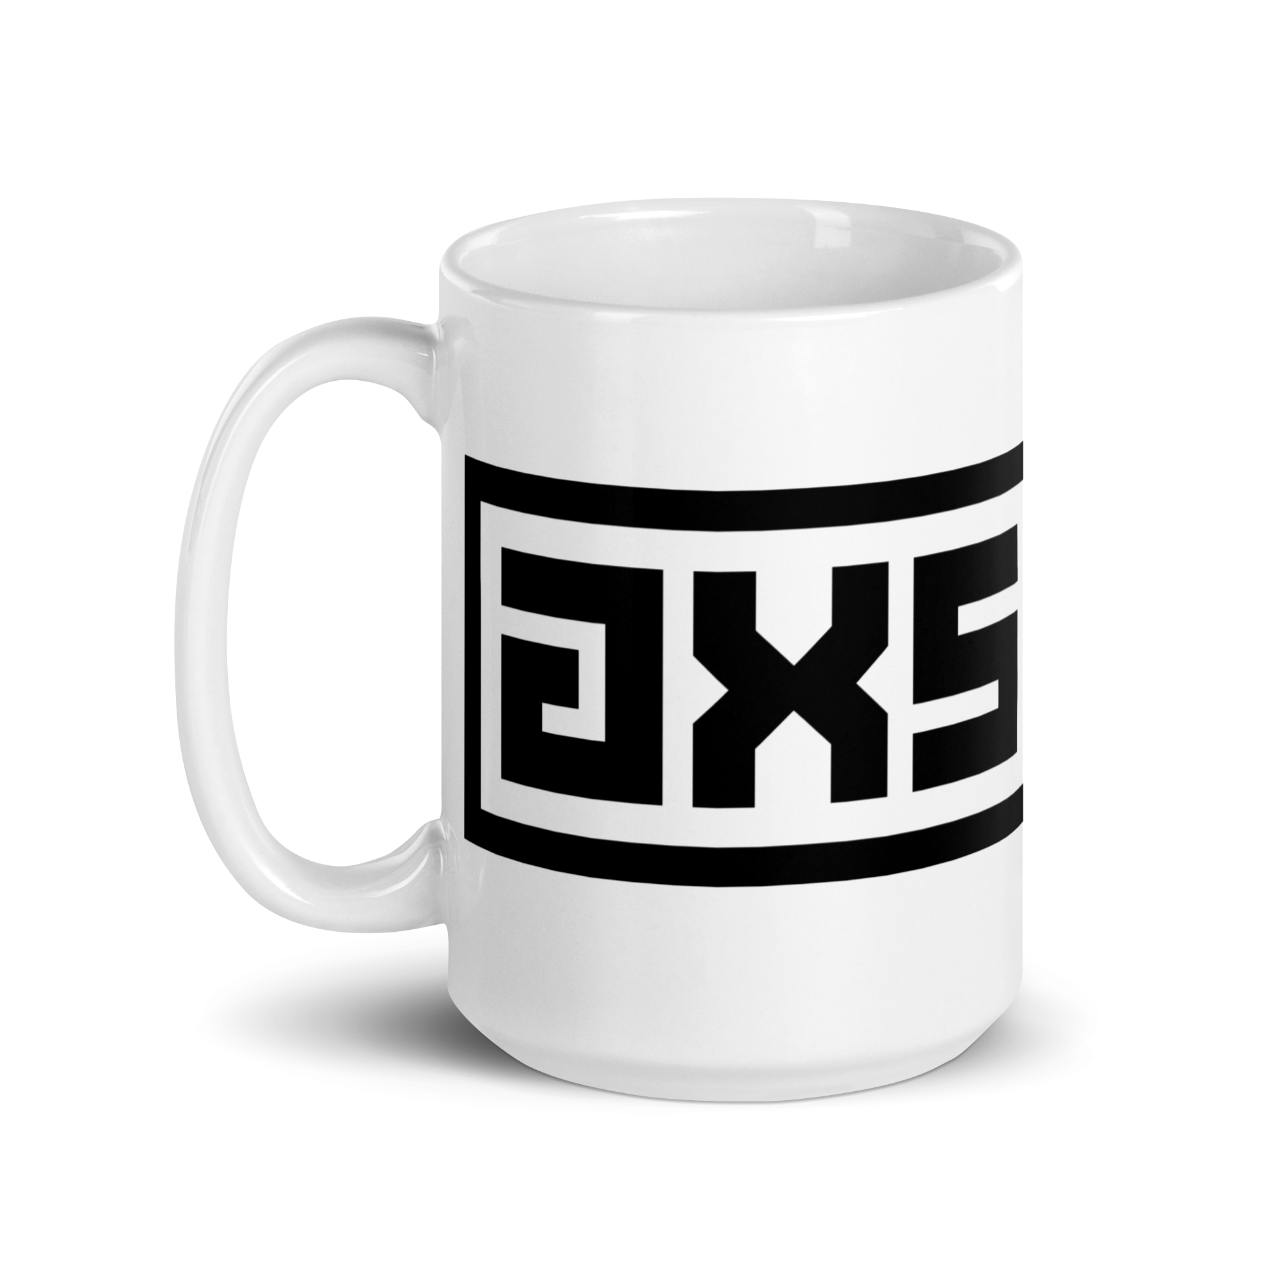 axsgtr axess electronics guitar music industry branded merchandise swag white ceramic coffee mug 15oz